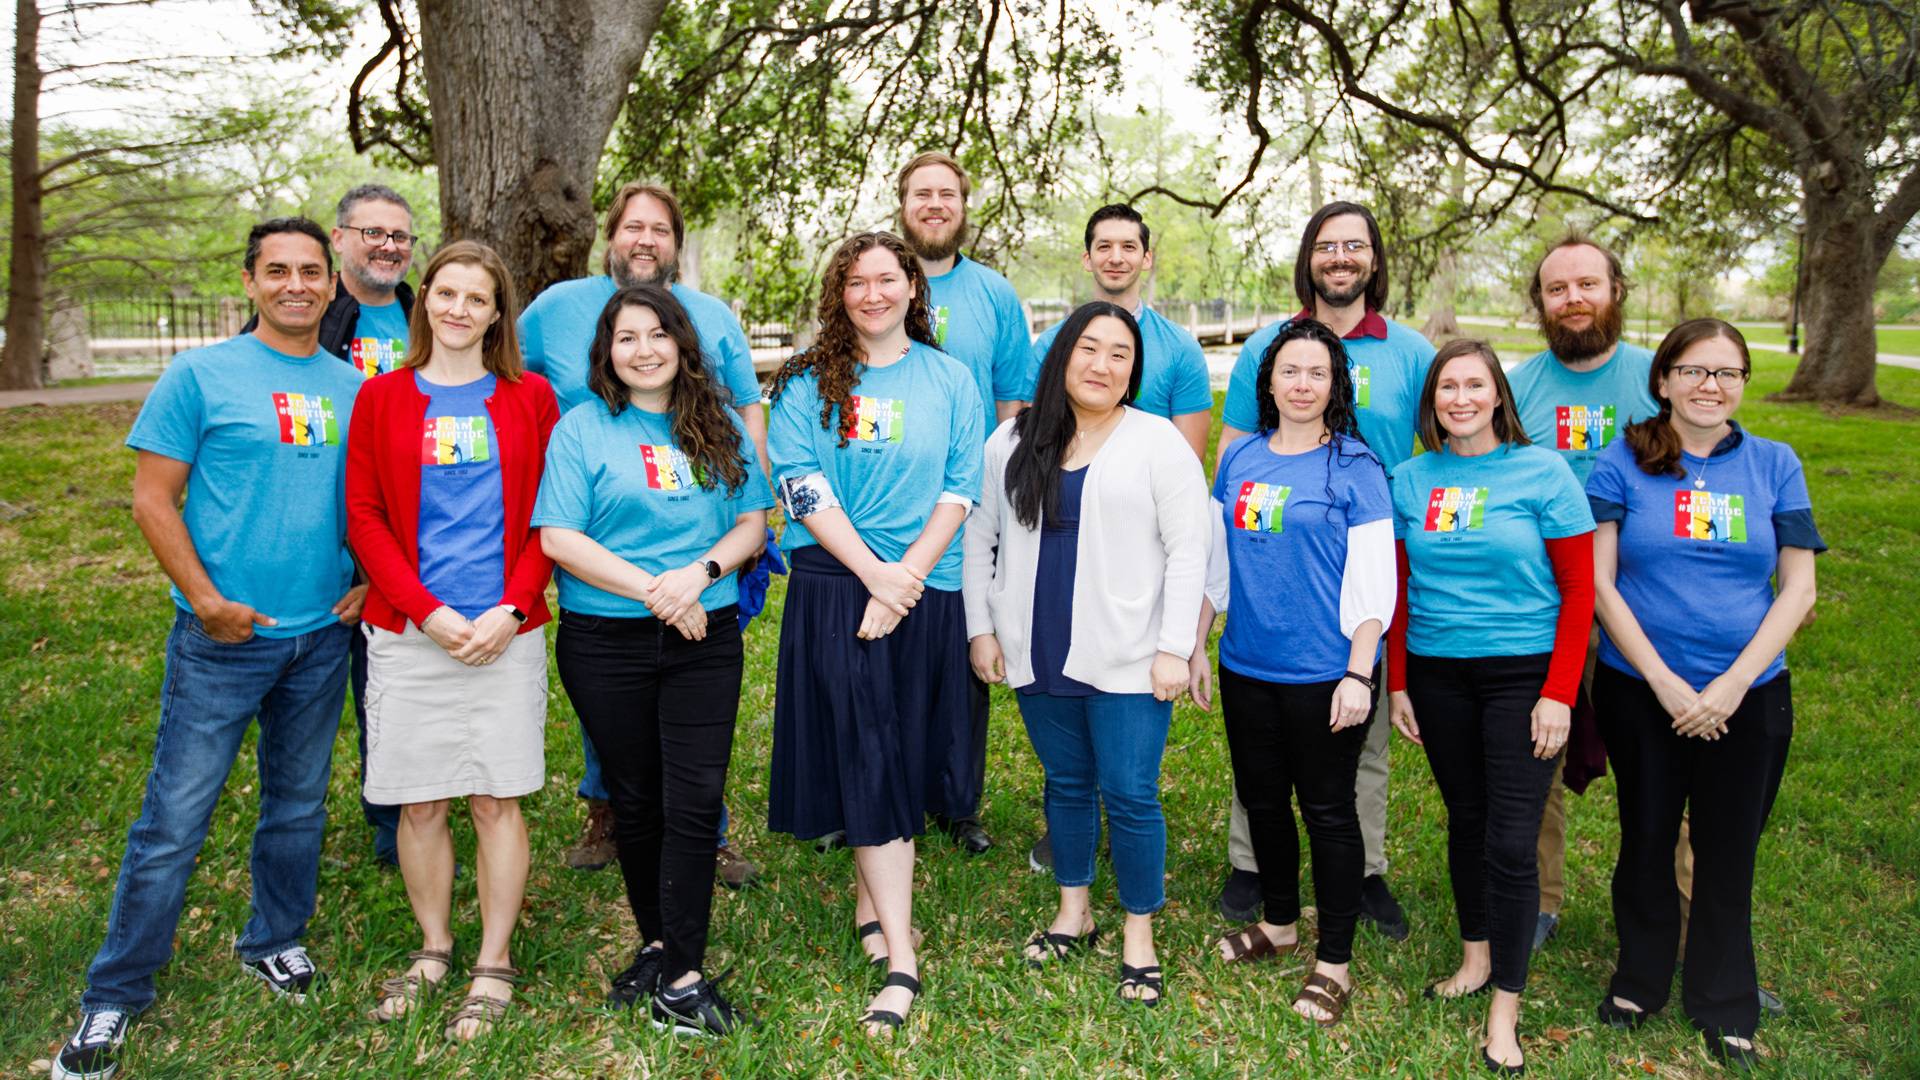 A dozen members of Texas State’s Mobile Web Team stand outside under trees